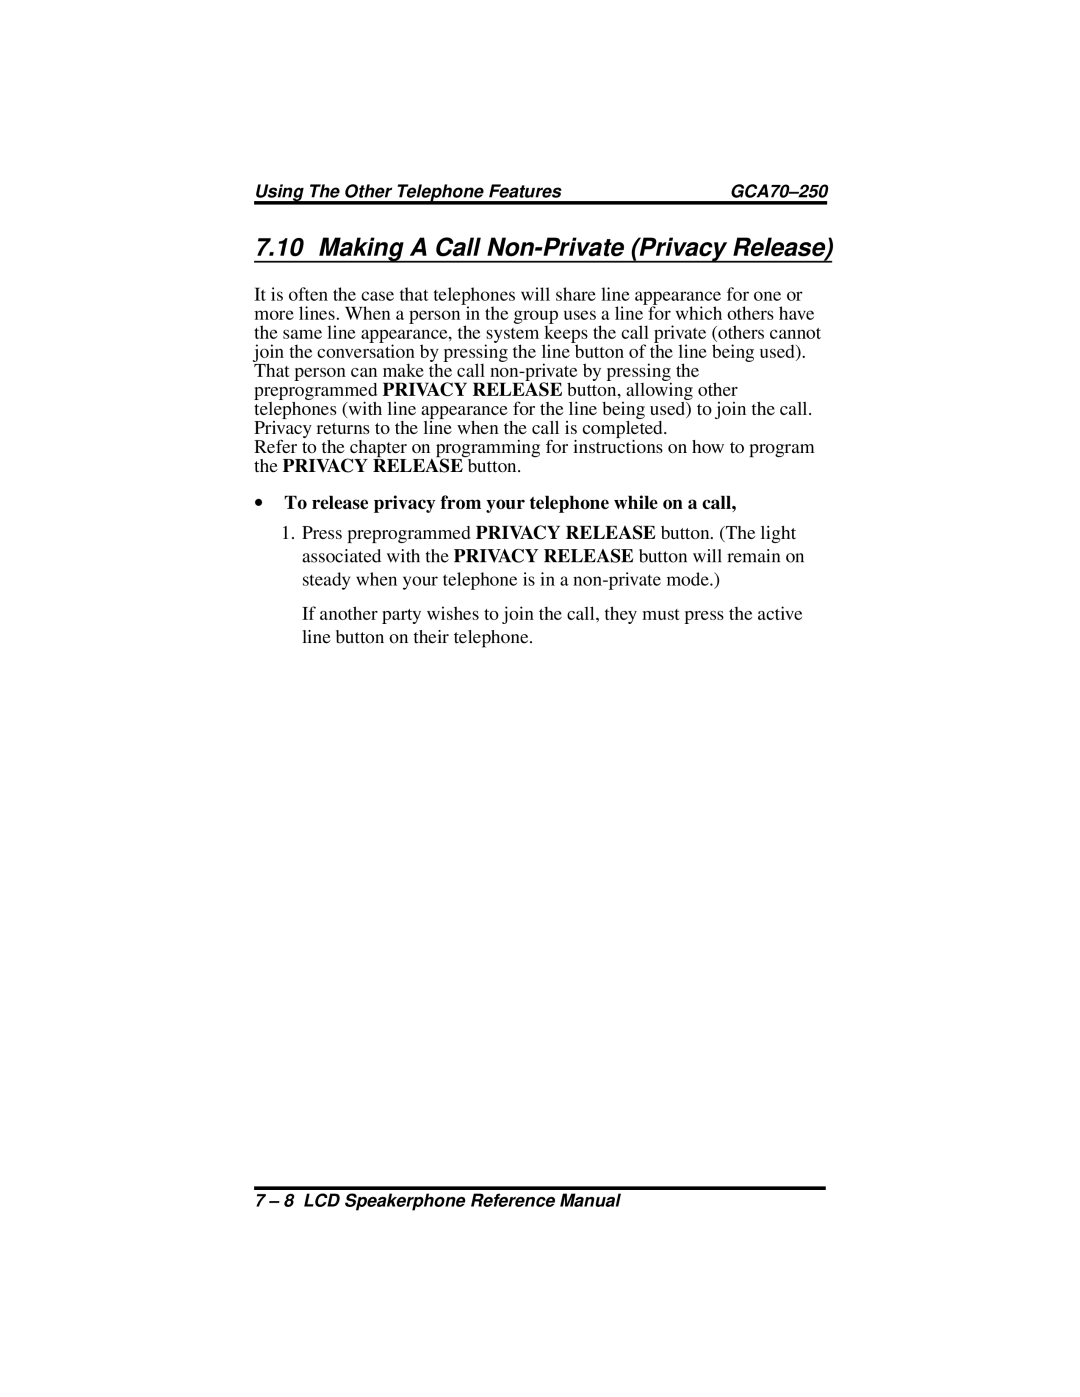 Vertical Communications 8324S, 8312S, 8324F manual Making a Call Non-Private Privacy Release 